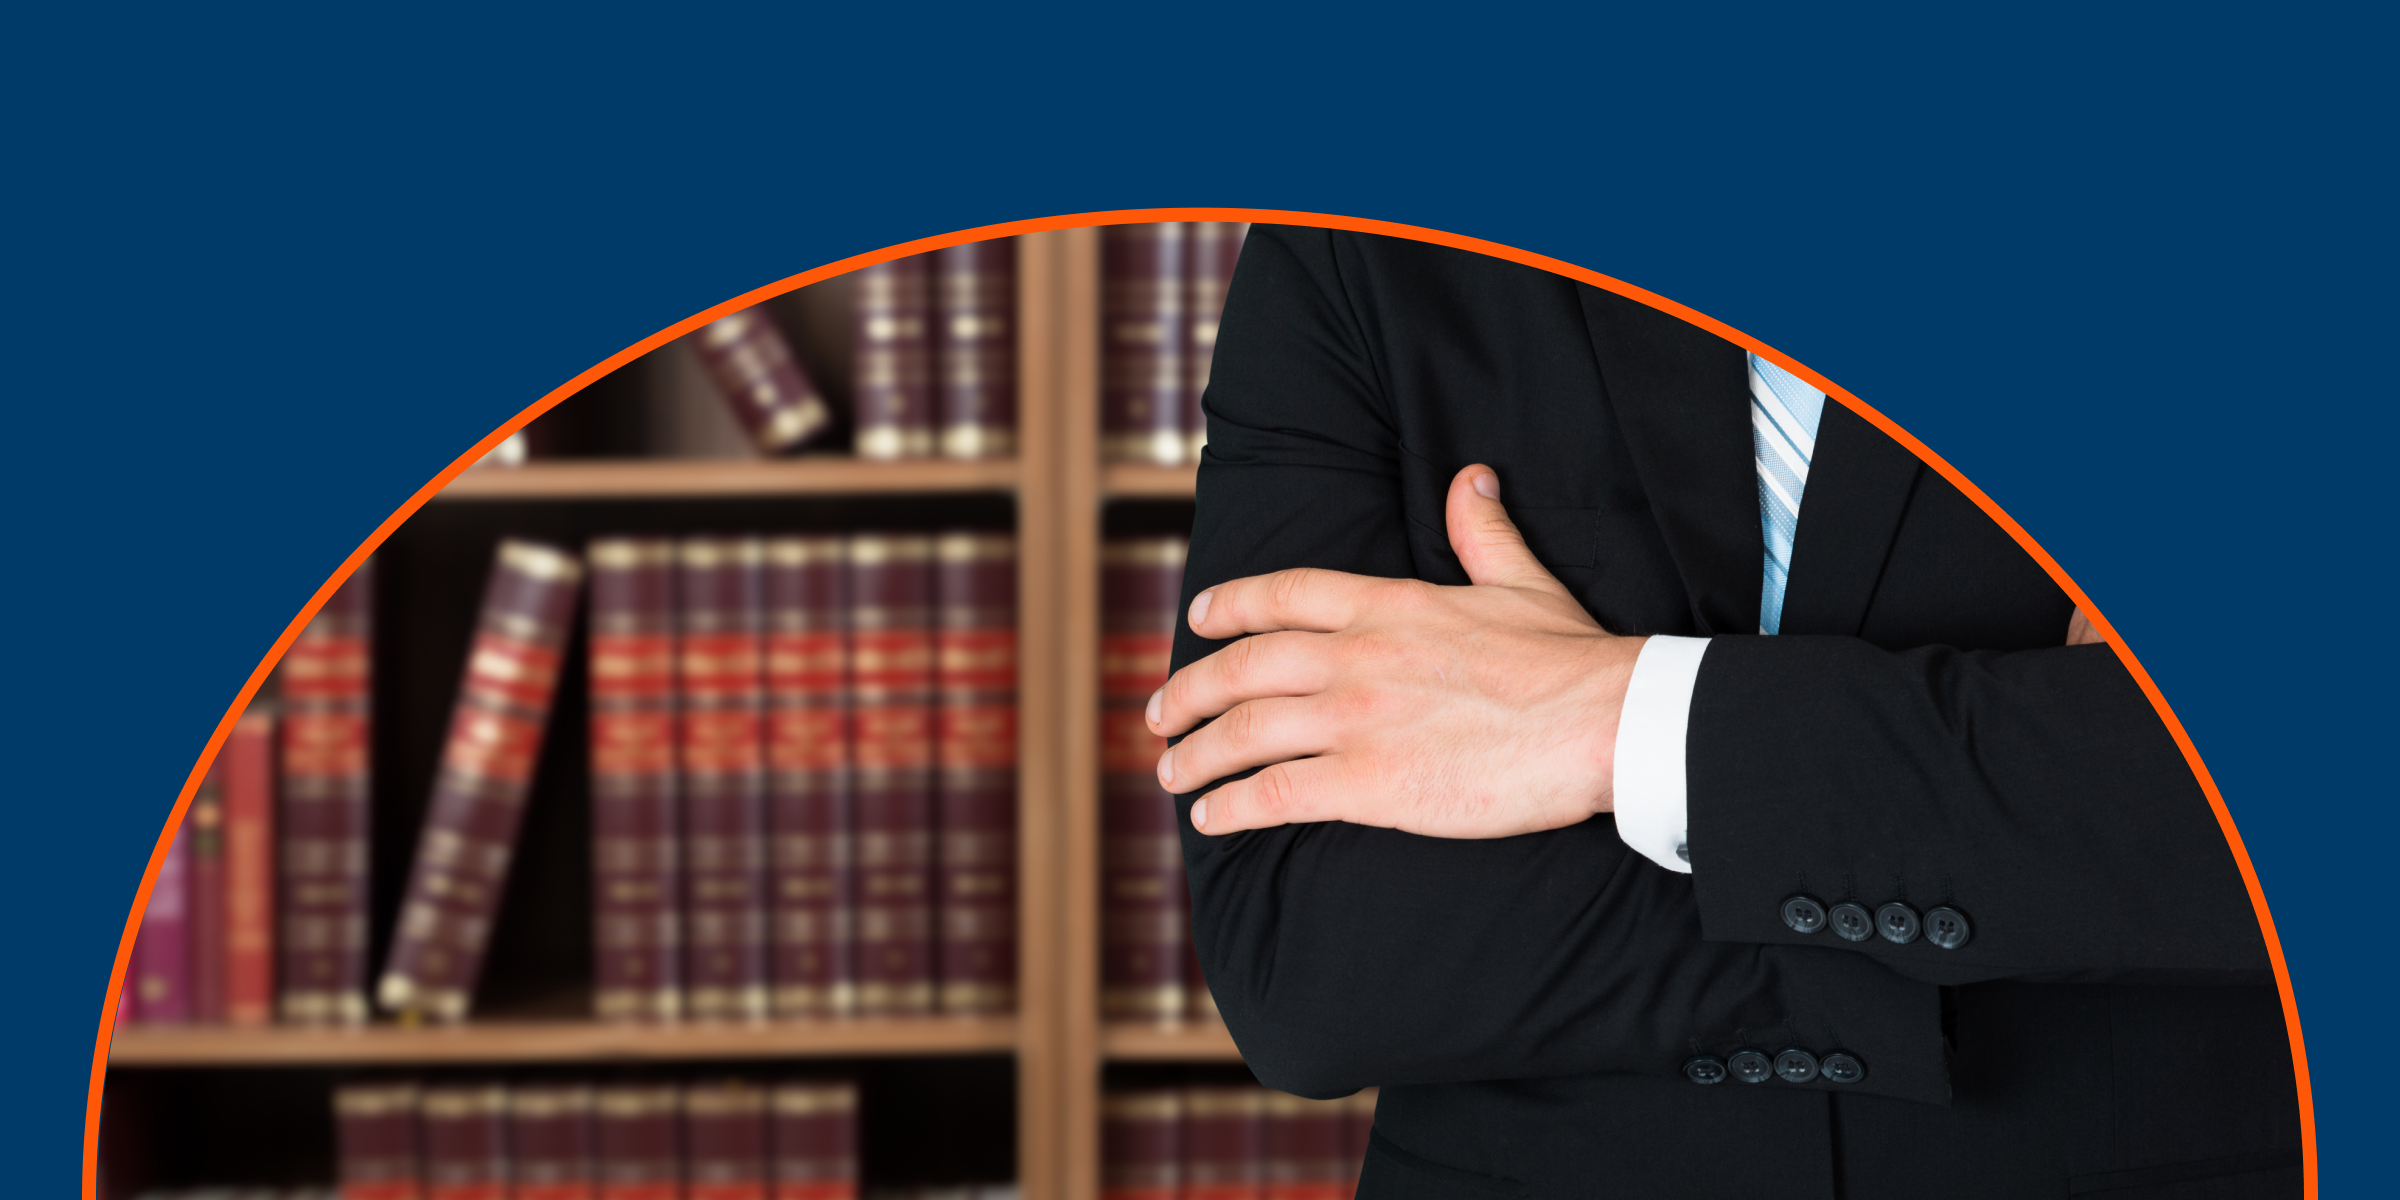 Get Listed on Our Free Expert Witness Directory